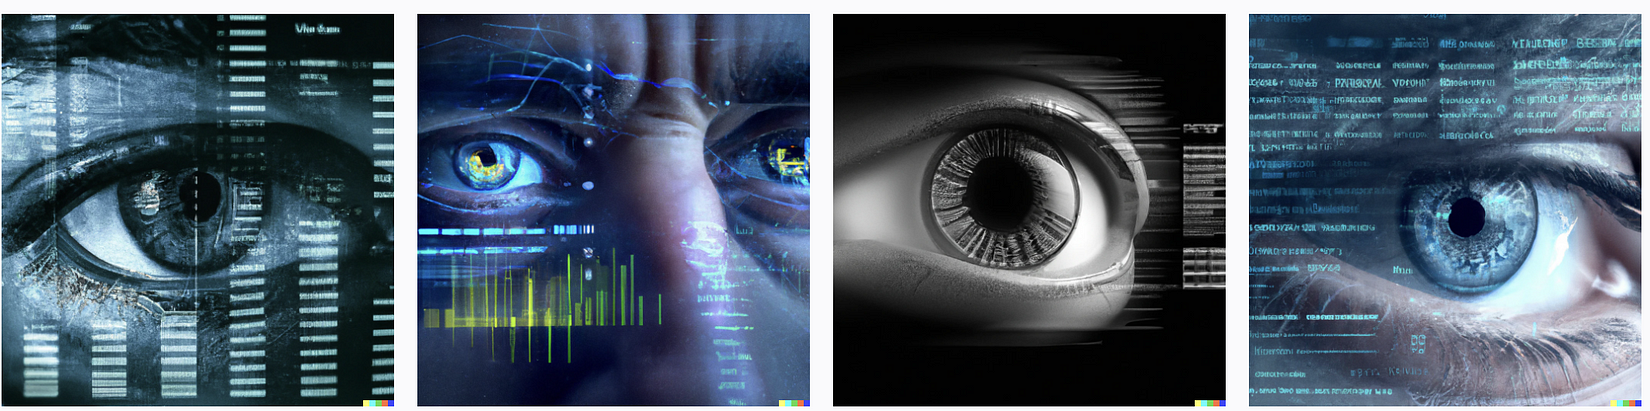 Hyper-realistic AI-generated image depicting a people's eyes gazing intently at intricate graphs and data, blending human and technological perspectives.